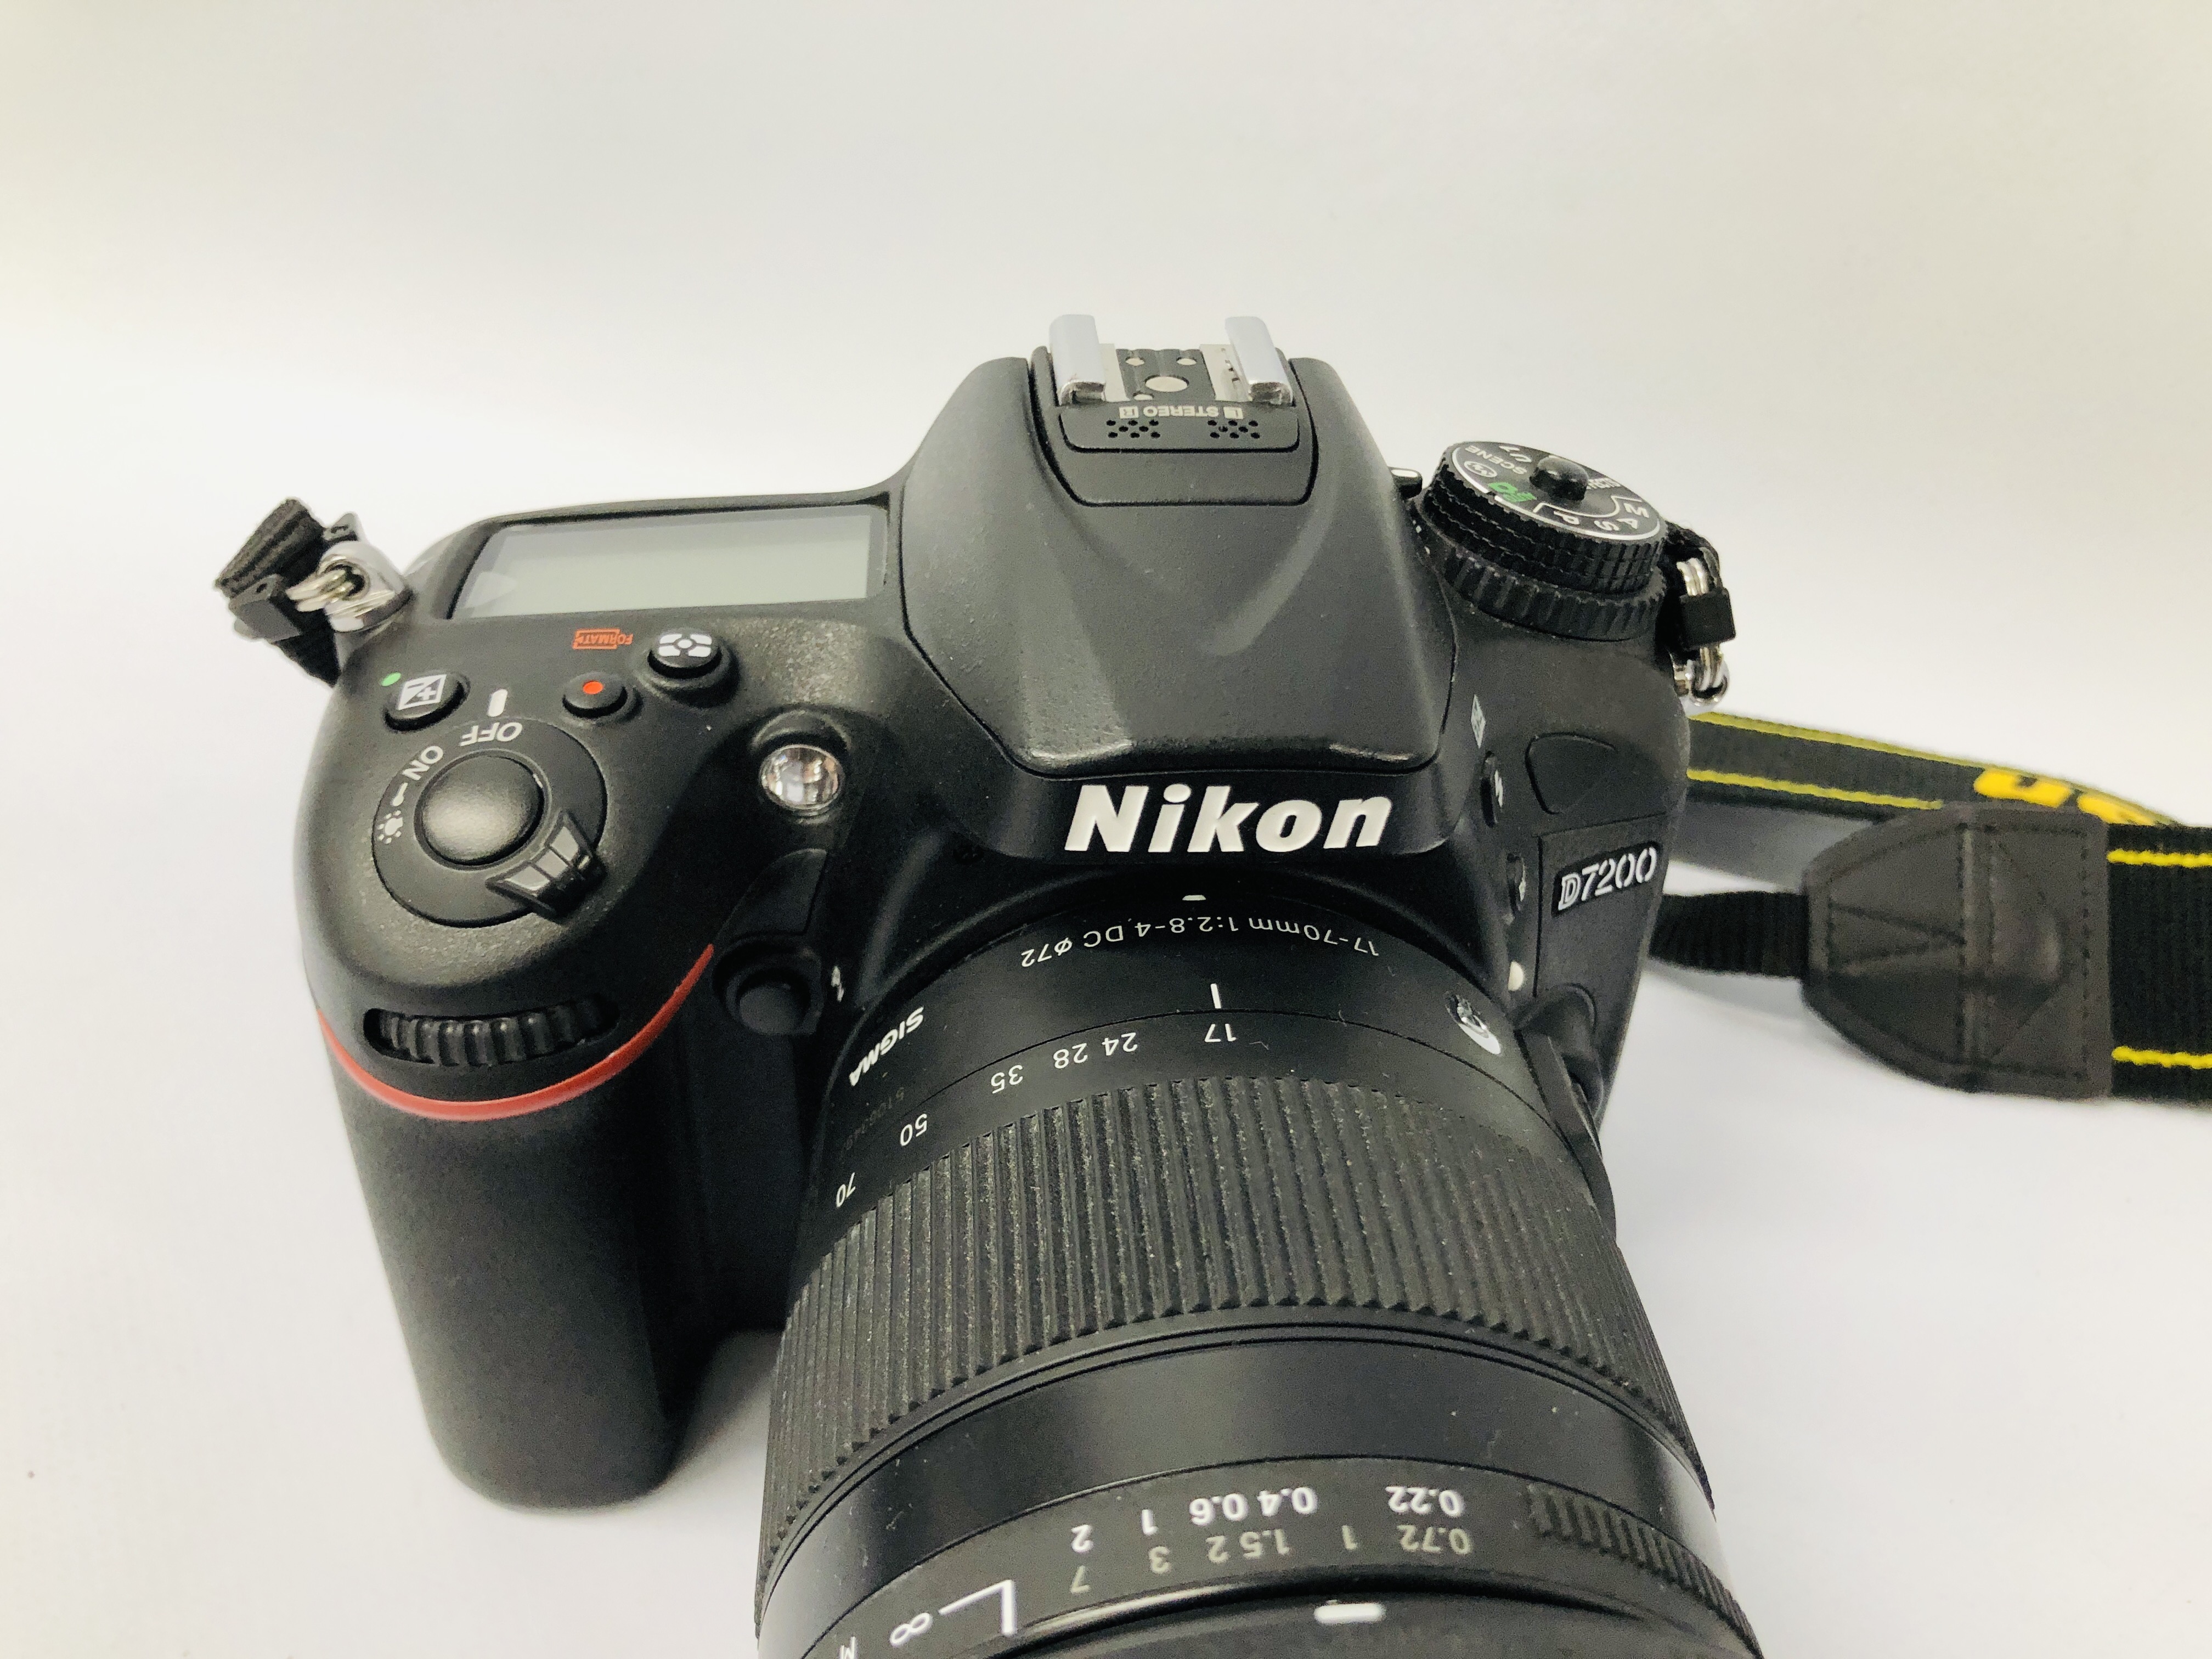 NIKON D7200 DIGITAL SLR CAMERA BODY FITTED WITH SIGMA 17-70 MM LENS S/N 9443071 - SOLD AS SEEN. - Image 2 of 5